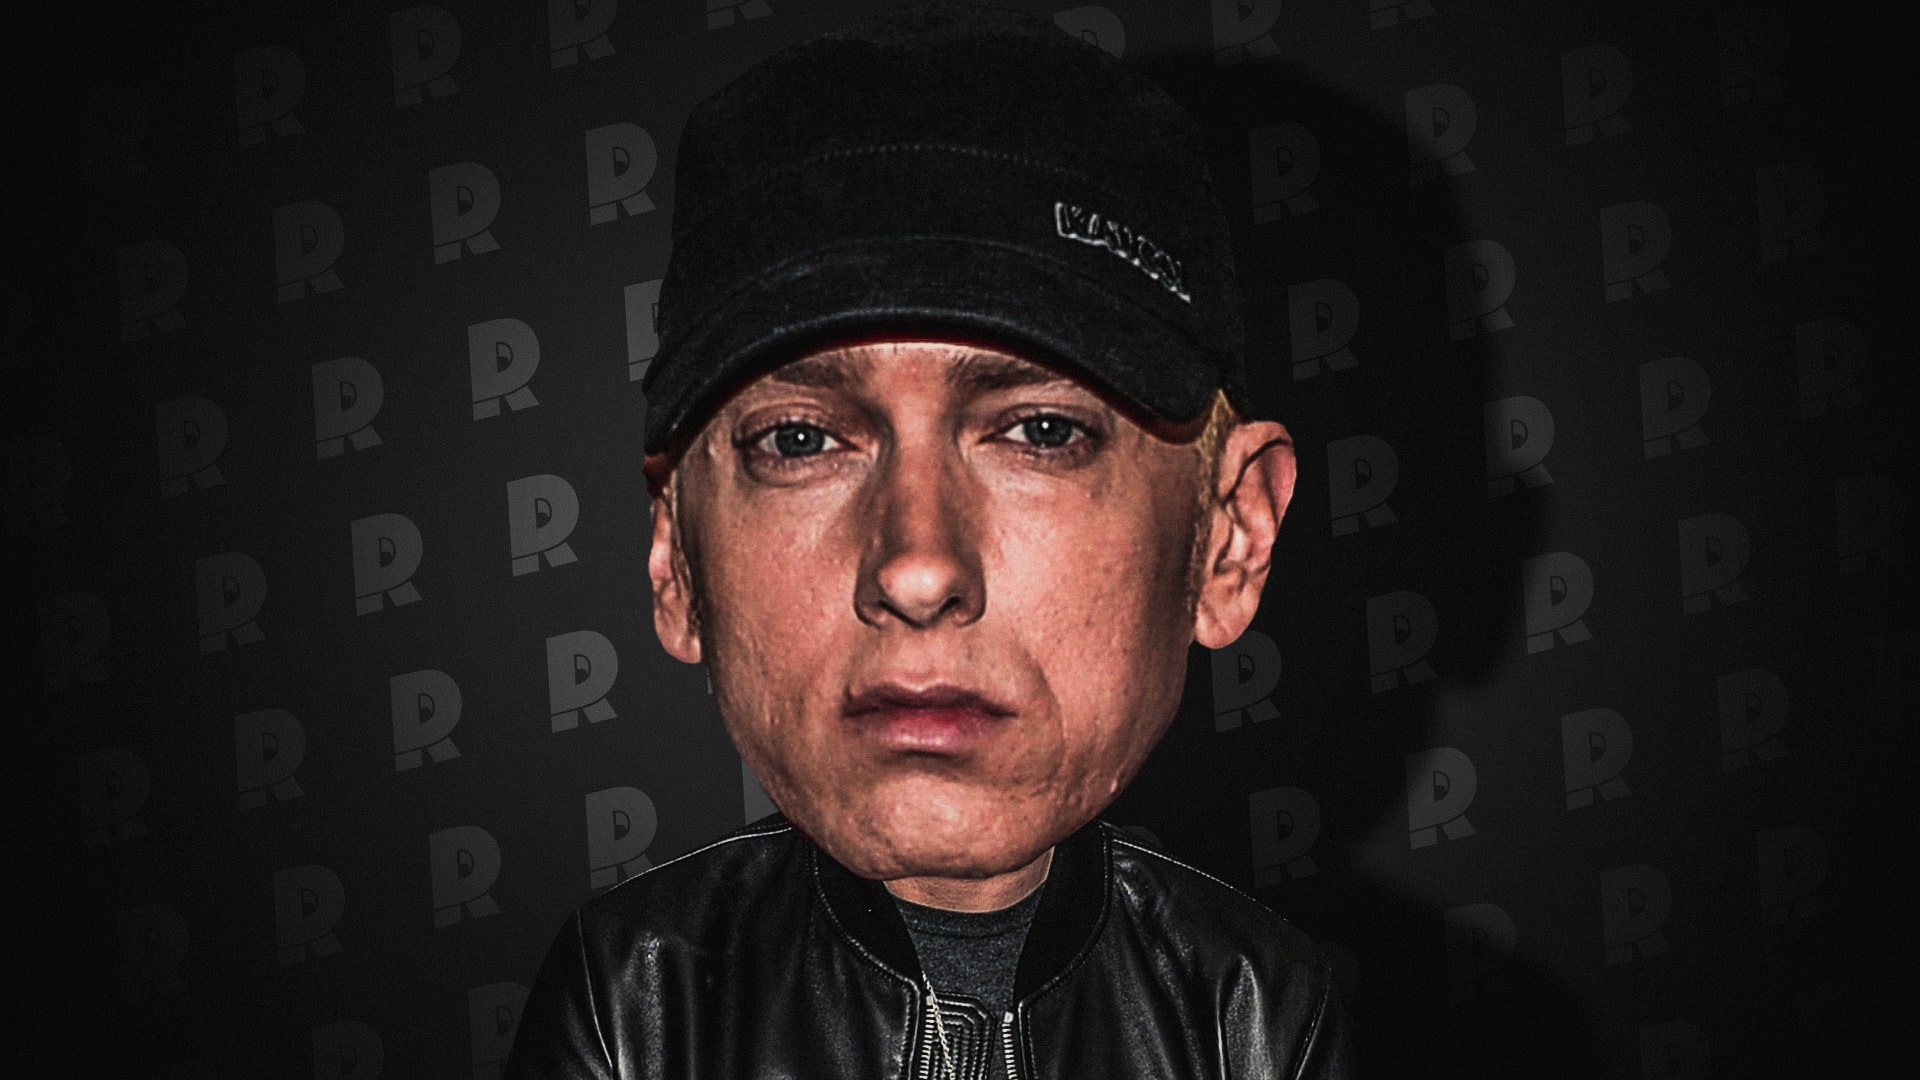 Eminem Net worth $230 Million - Who Is the Richest Hip Hop Artist in the World of 2022?